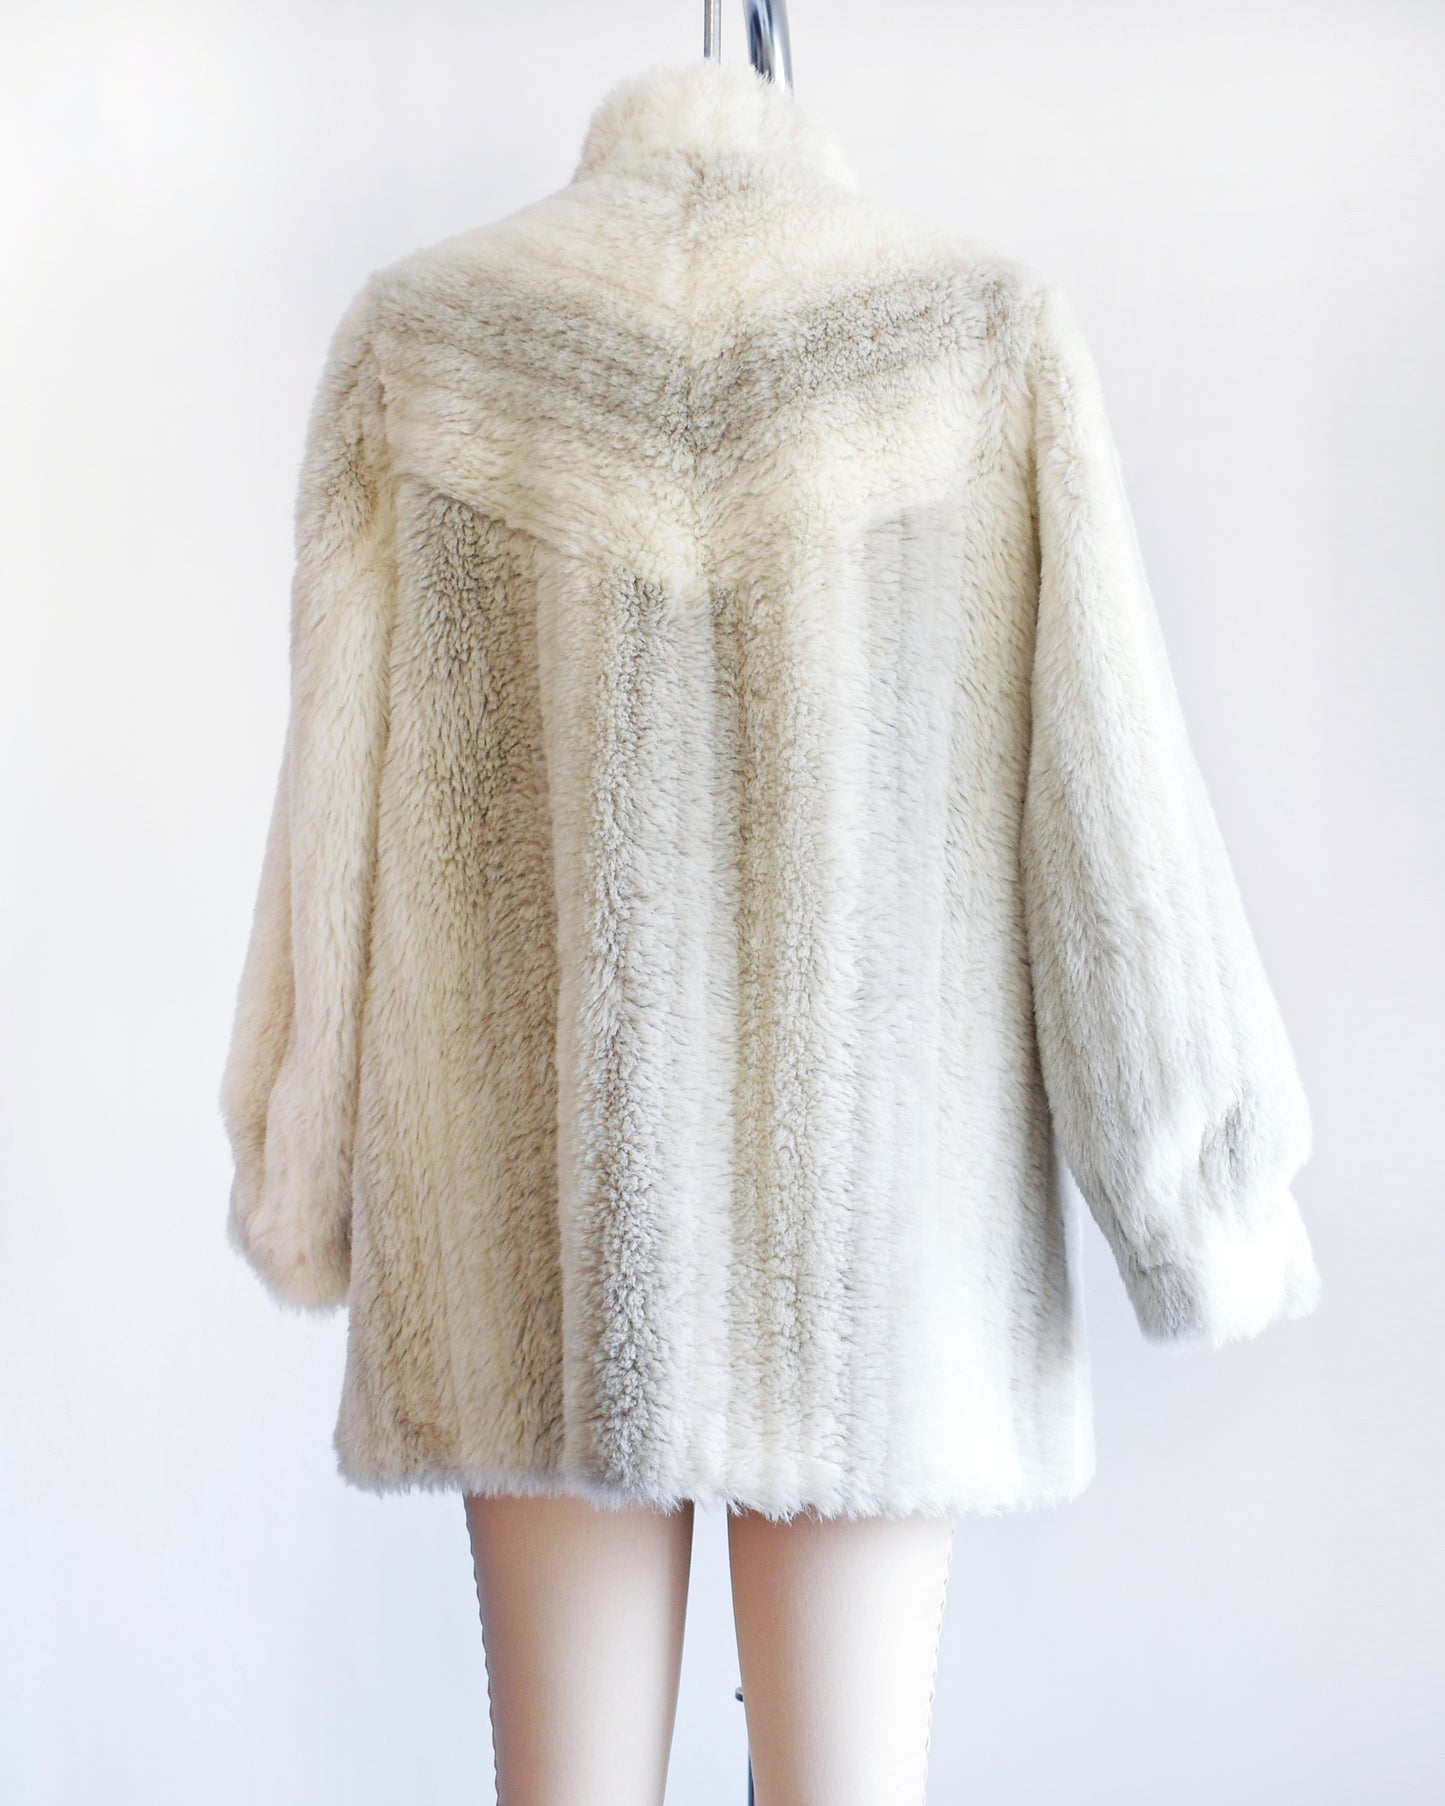 Back view of a vintage 70s/80s faux fur coat is made from a plush white faux fur with gray stripes, and features a stand-up collar with slightly puffed shoulders.